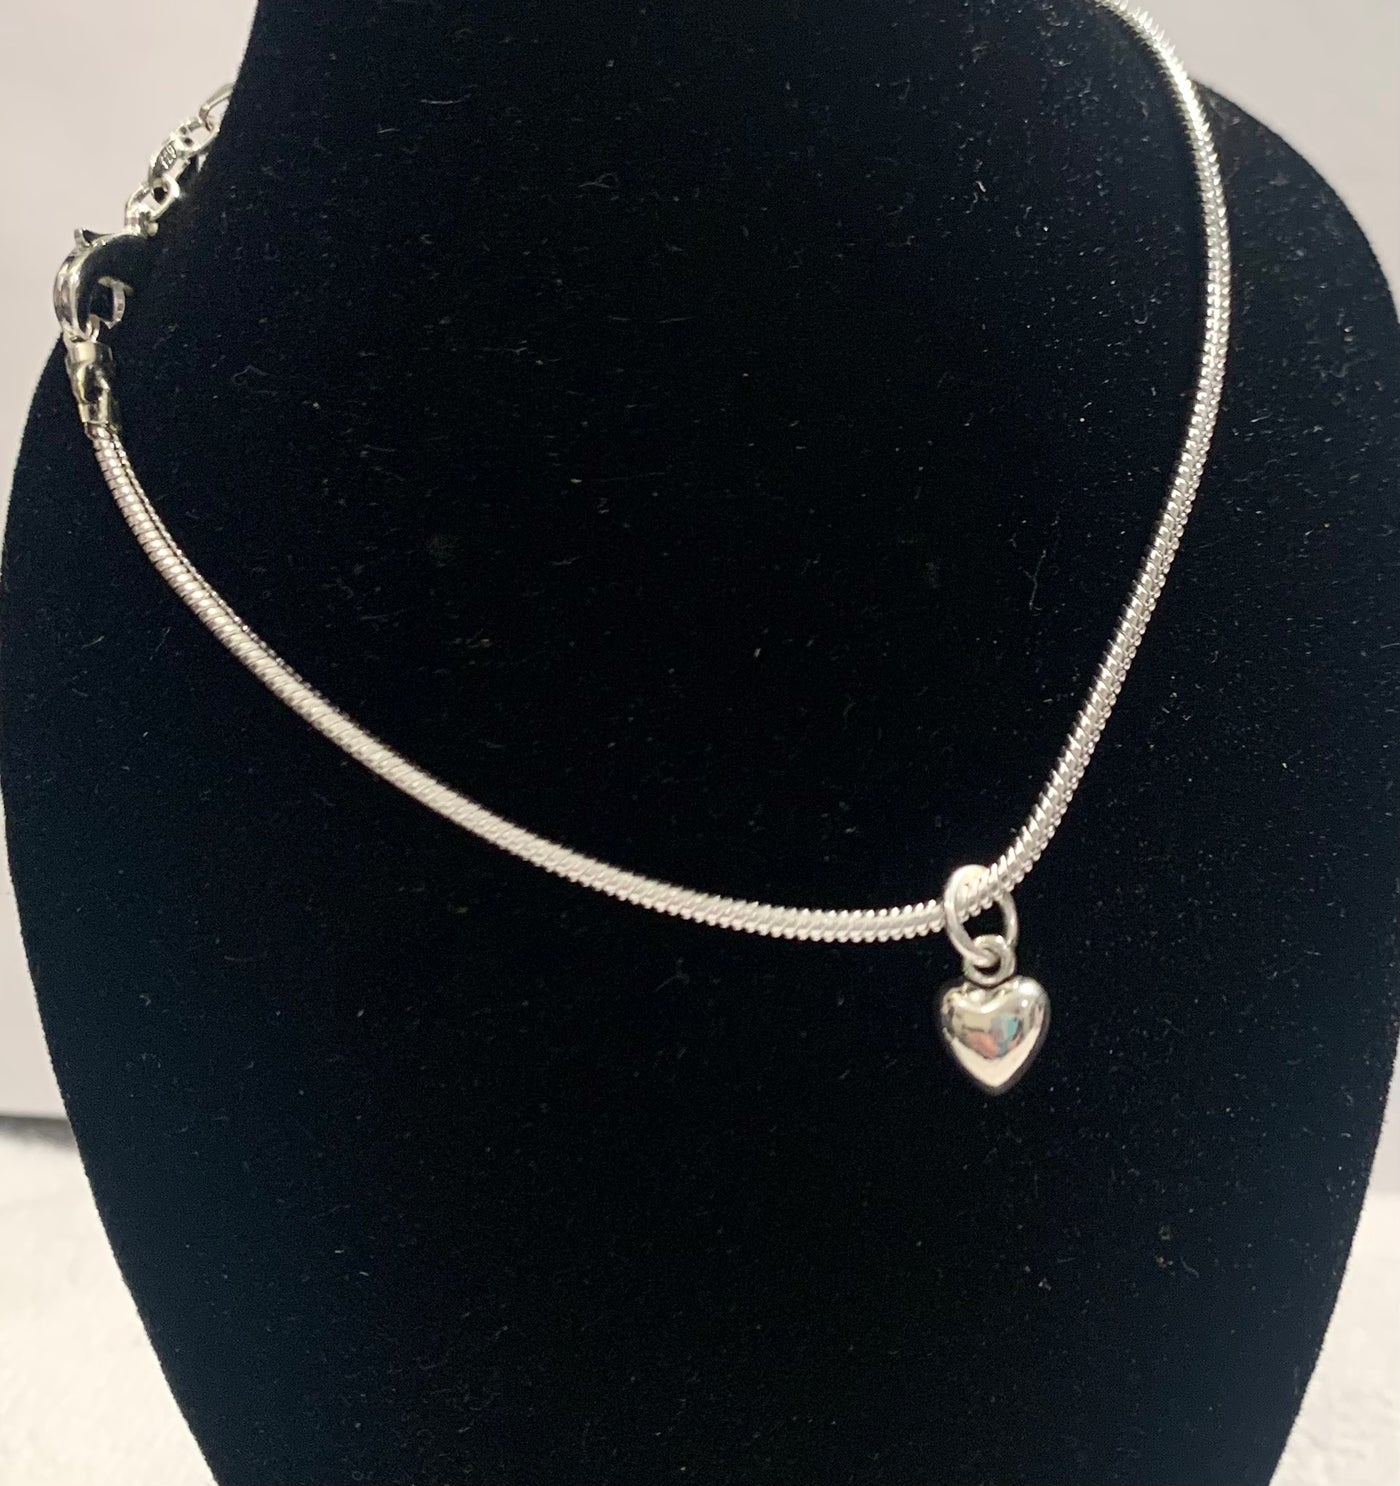 Silver Anklet with Silver Heart pendant - Brent's Bling